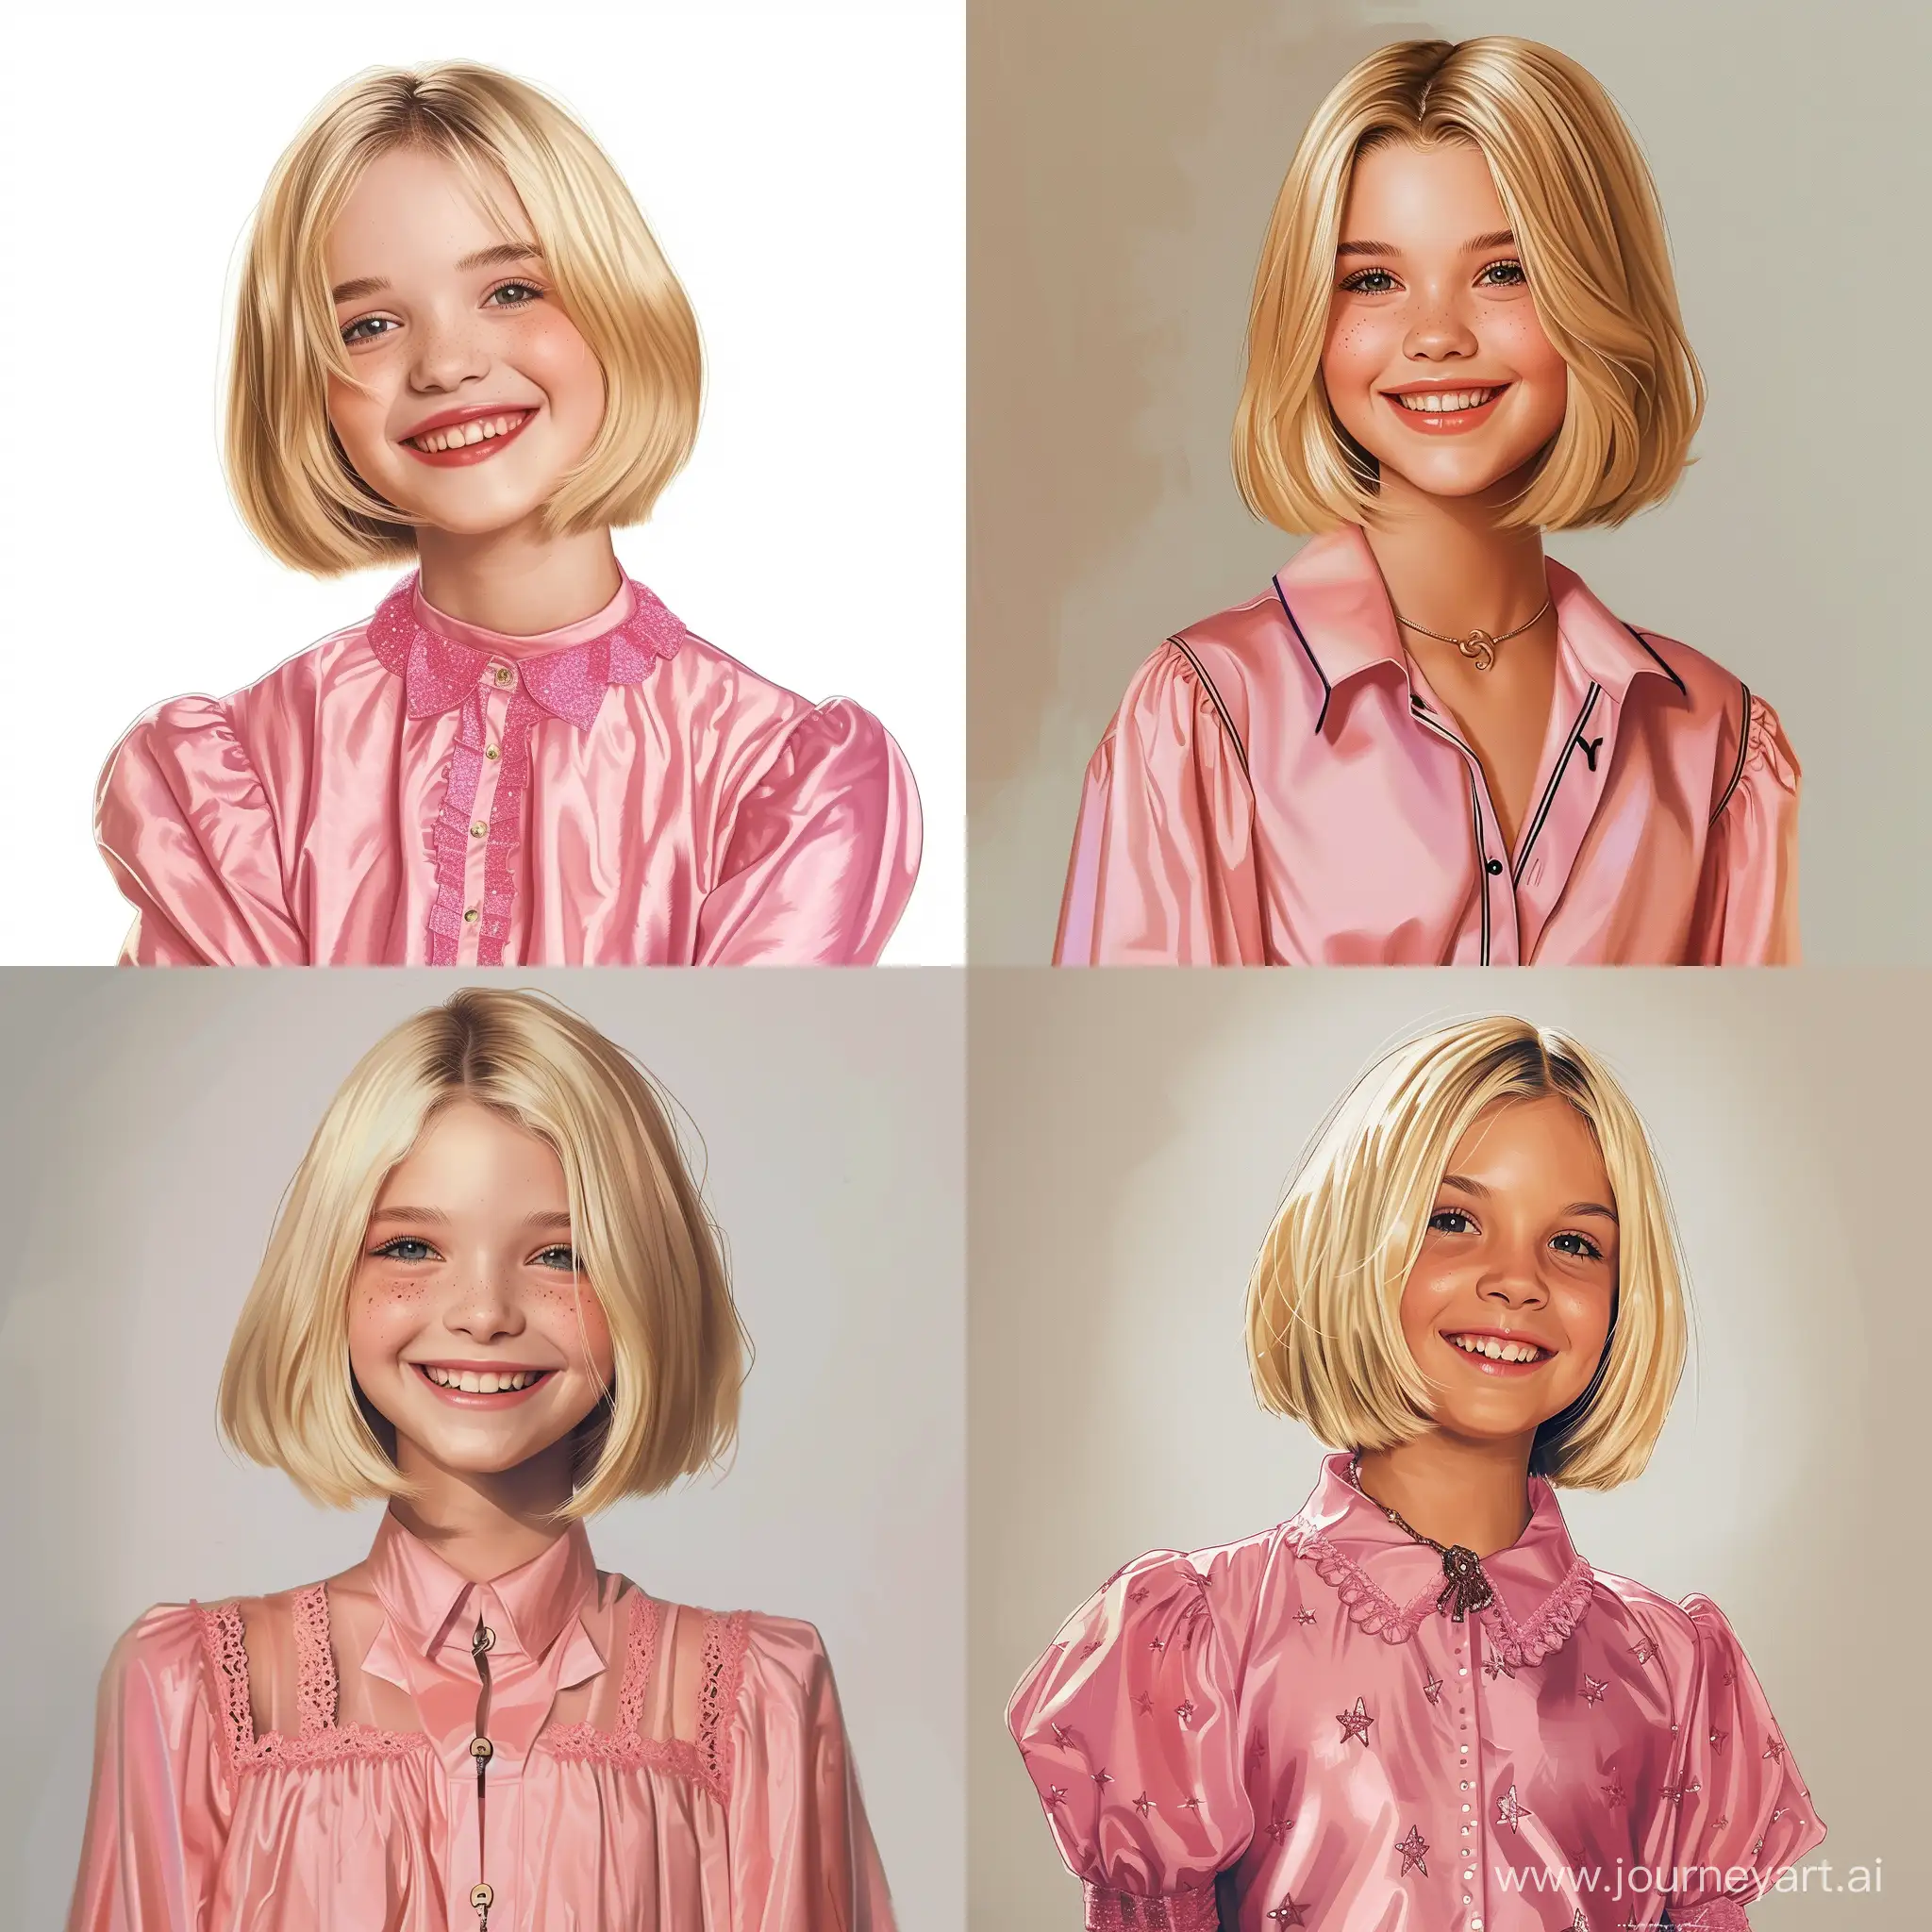 cute young blonde teen who looks like Drew Barrymore, smiling, realistic drawing, digital, straight short hair, bob bob, pink glam rock blouse, punk makeup